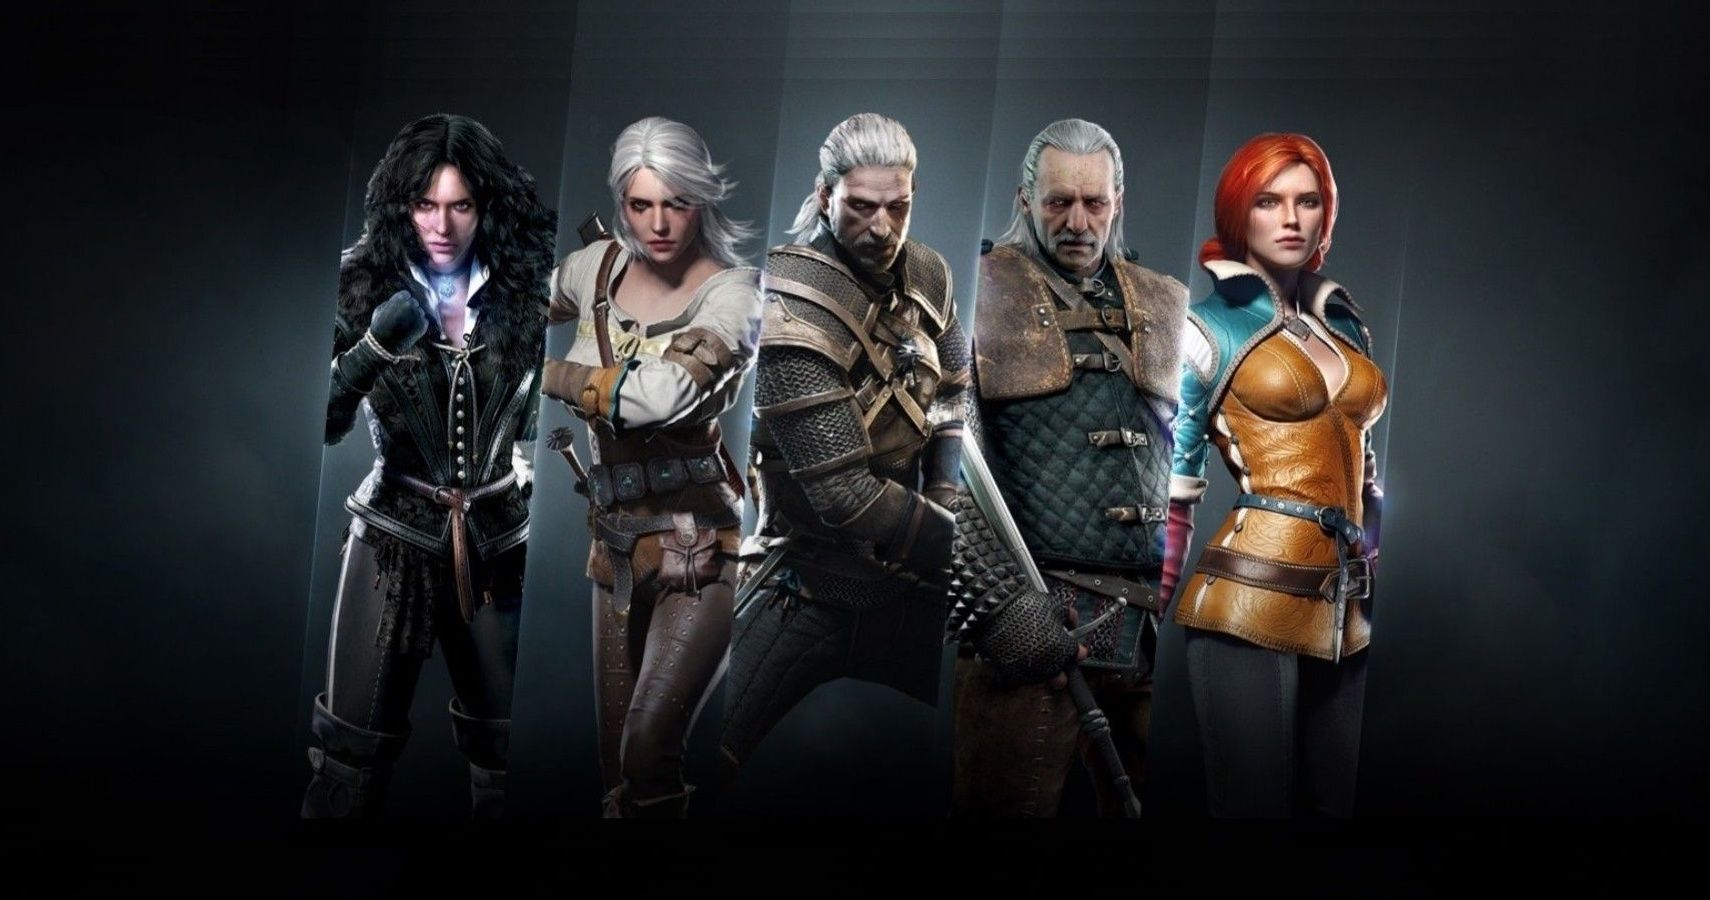 the-witcher-3-10-best-characters-from-the-main-questline-ranked